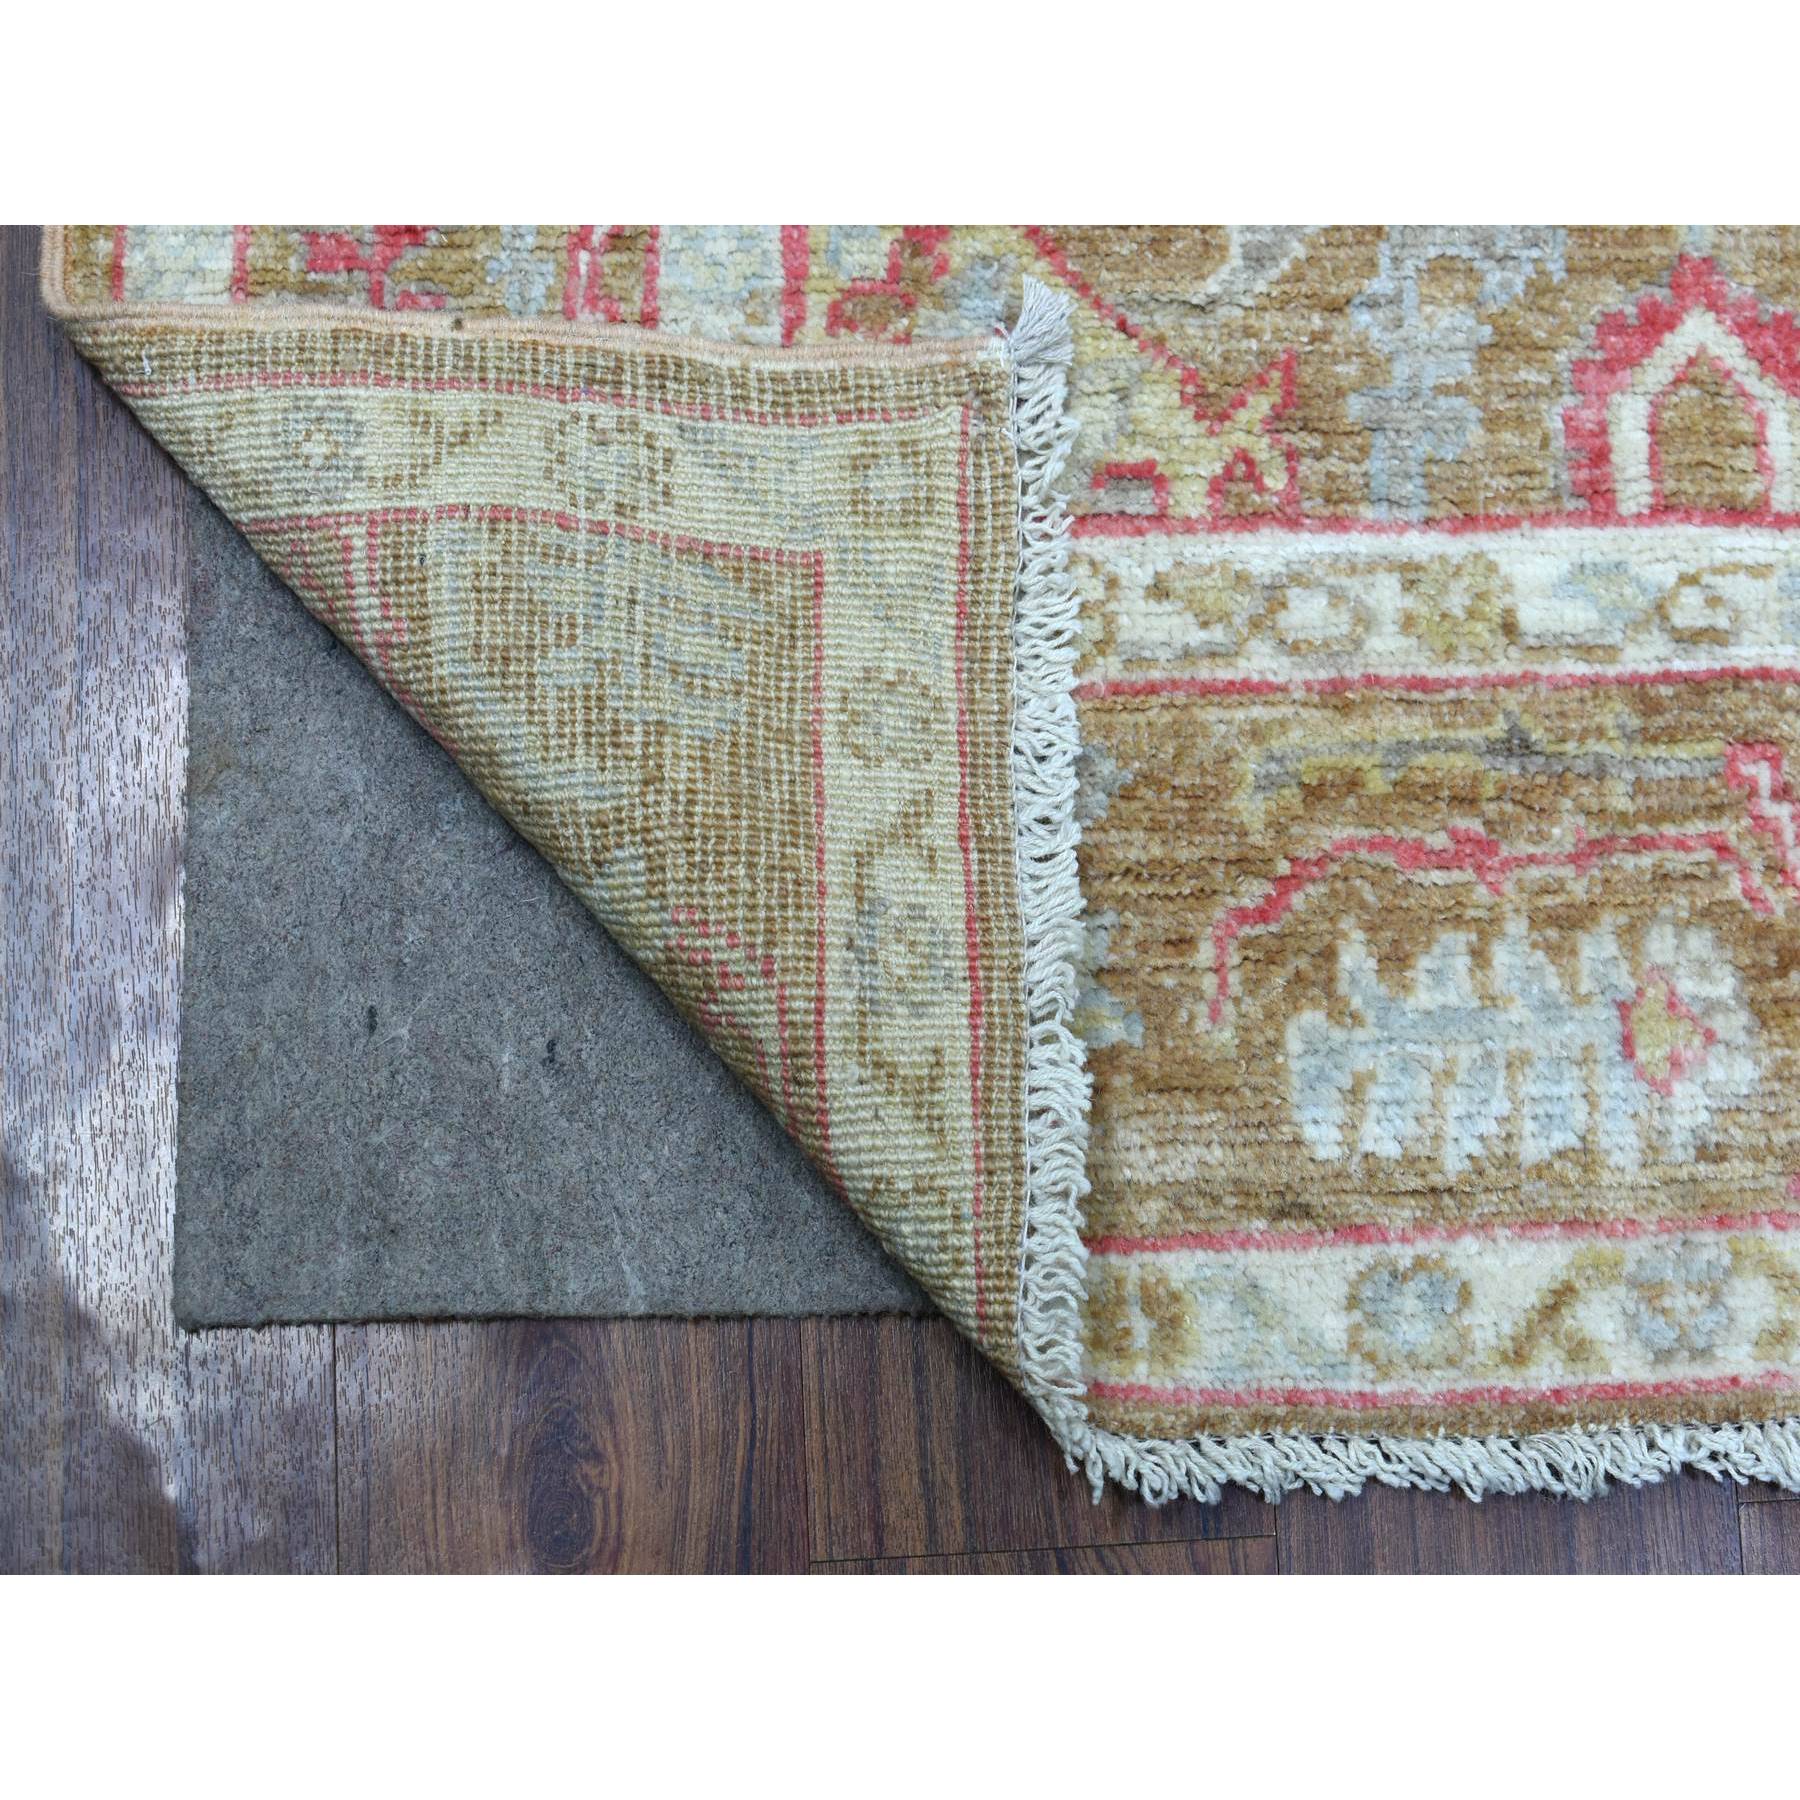 5'x7' Hand Woven Taupe Angora Ushak with Assortment of Colors Soft, Afghan Wool Oriental Rug 